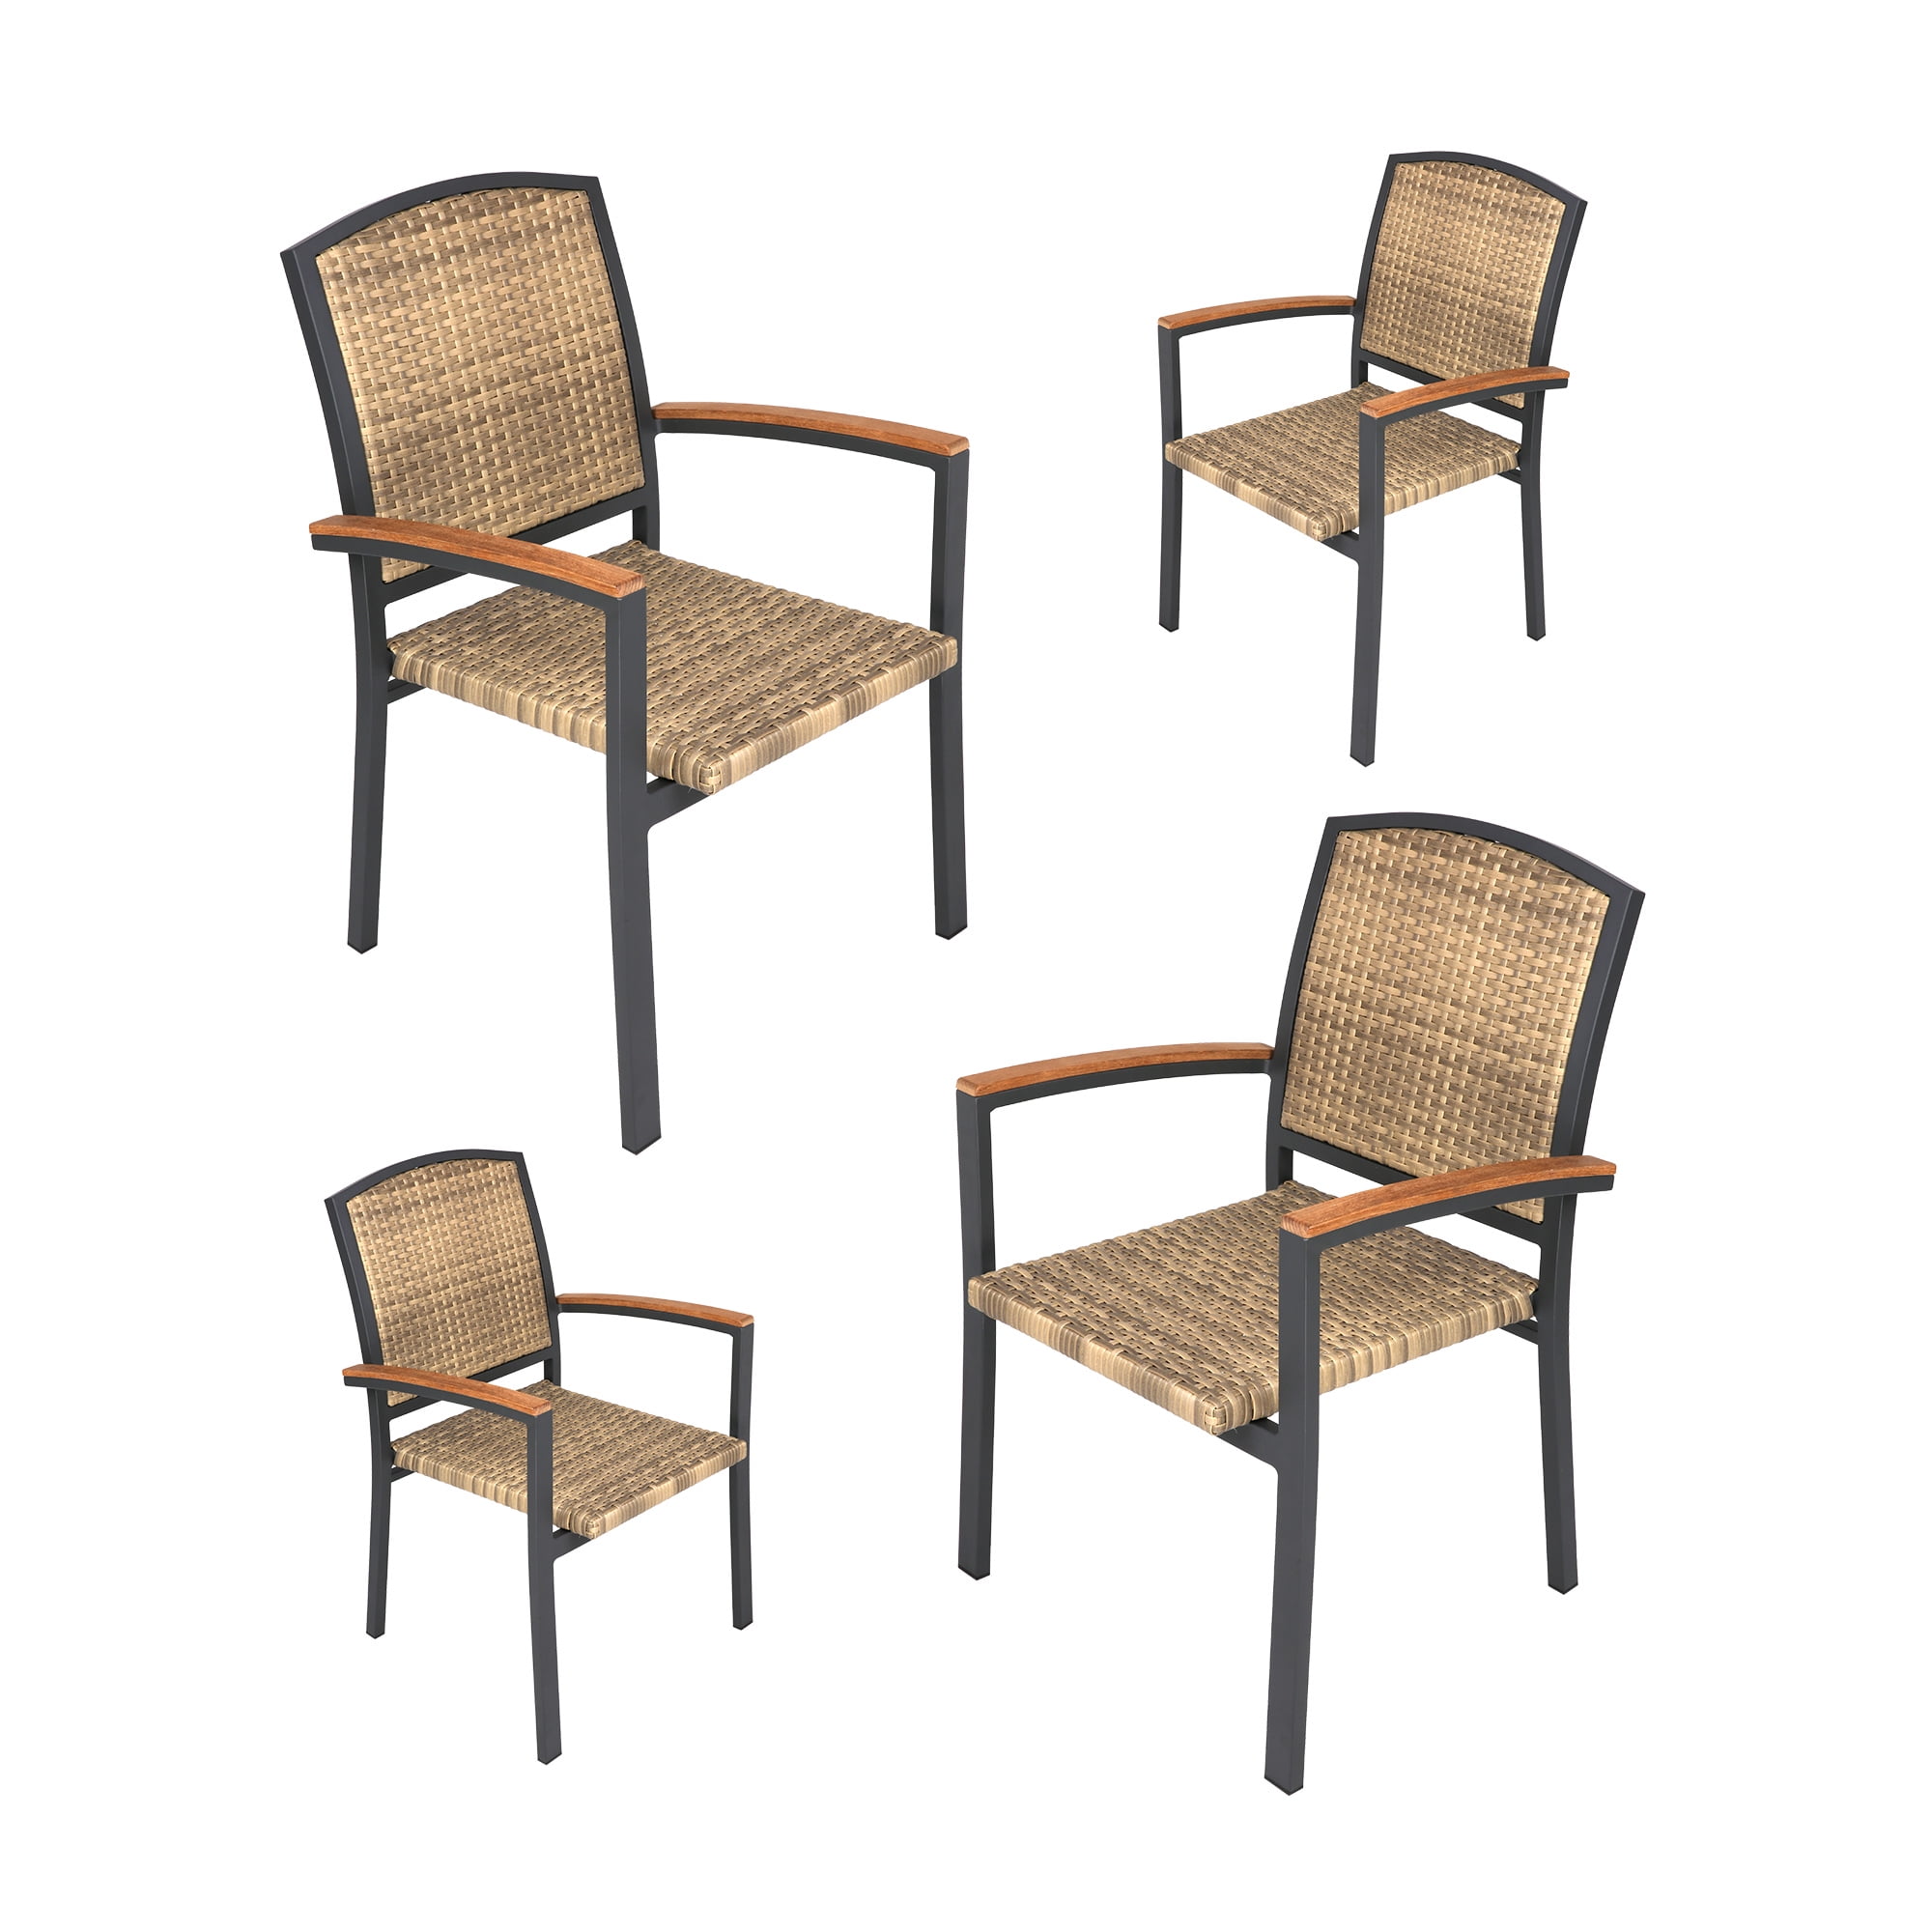 KARMAS PRODUCT Stackable Outdoor Patio Dining Chairs Set of 4 Aluminum